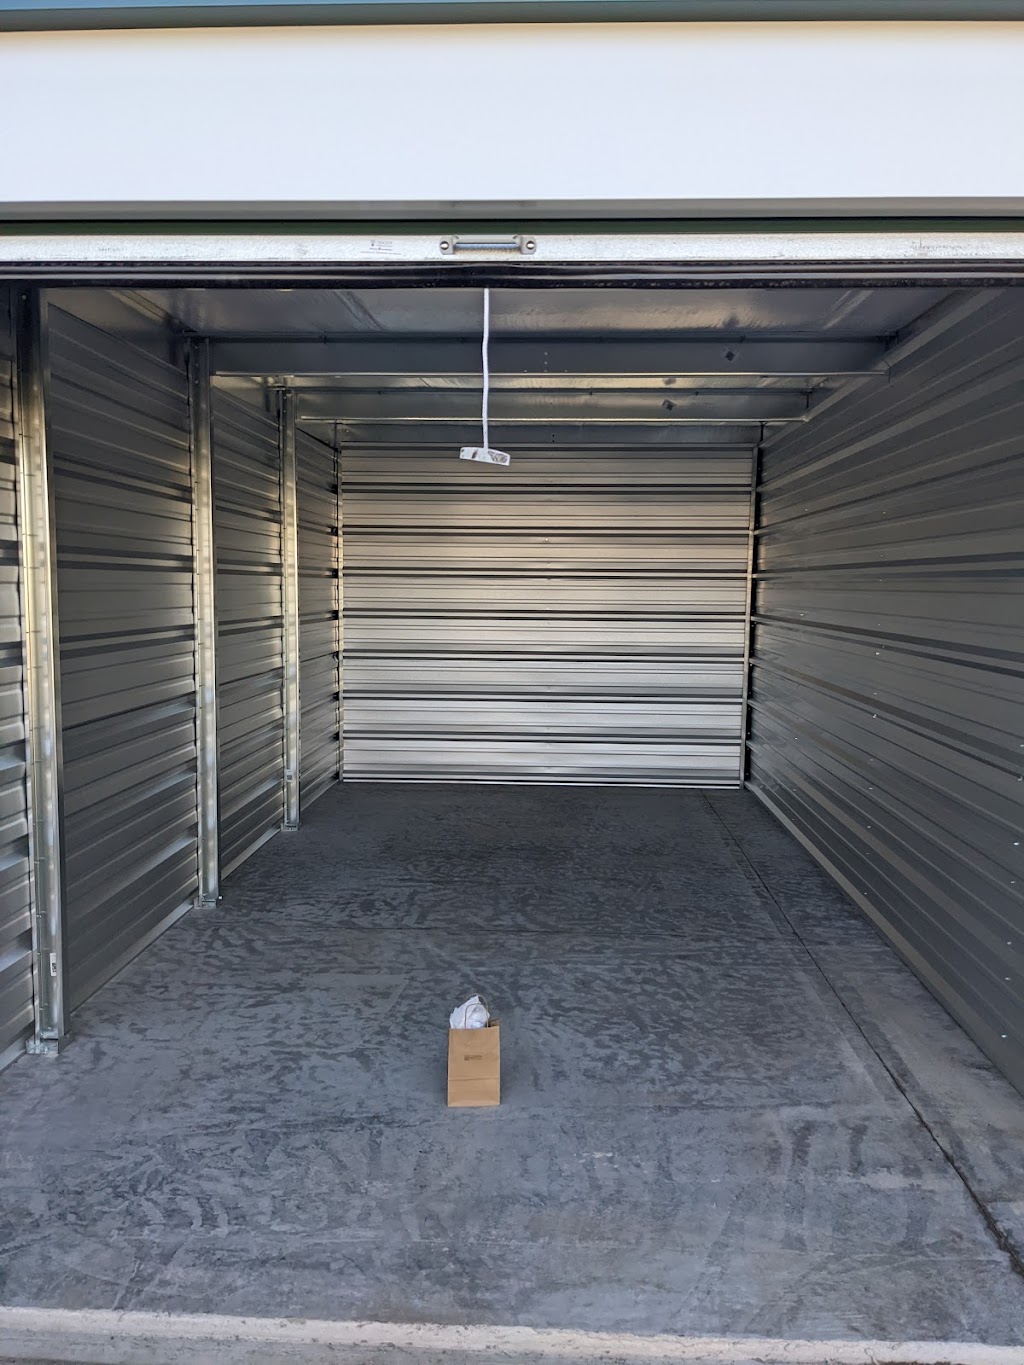 Rent Rite Self-Storage Springfield Akron | 1589 Canton Rd, Akron, OH 44312 | Phone: (800) 897-5818